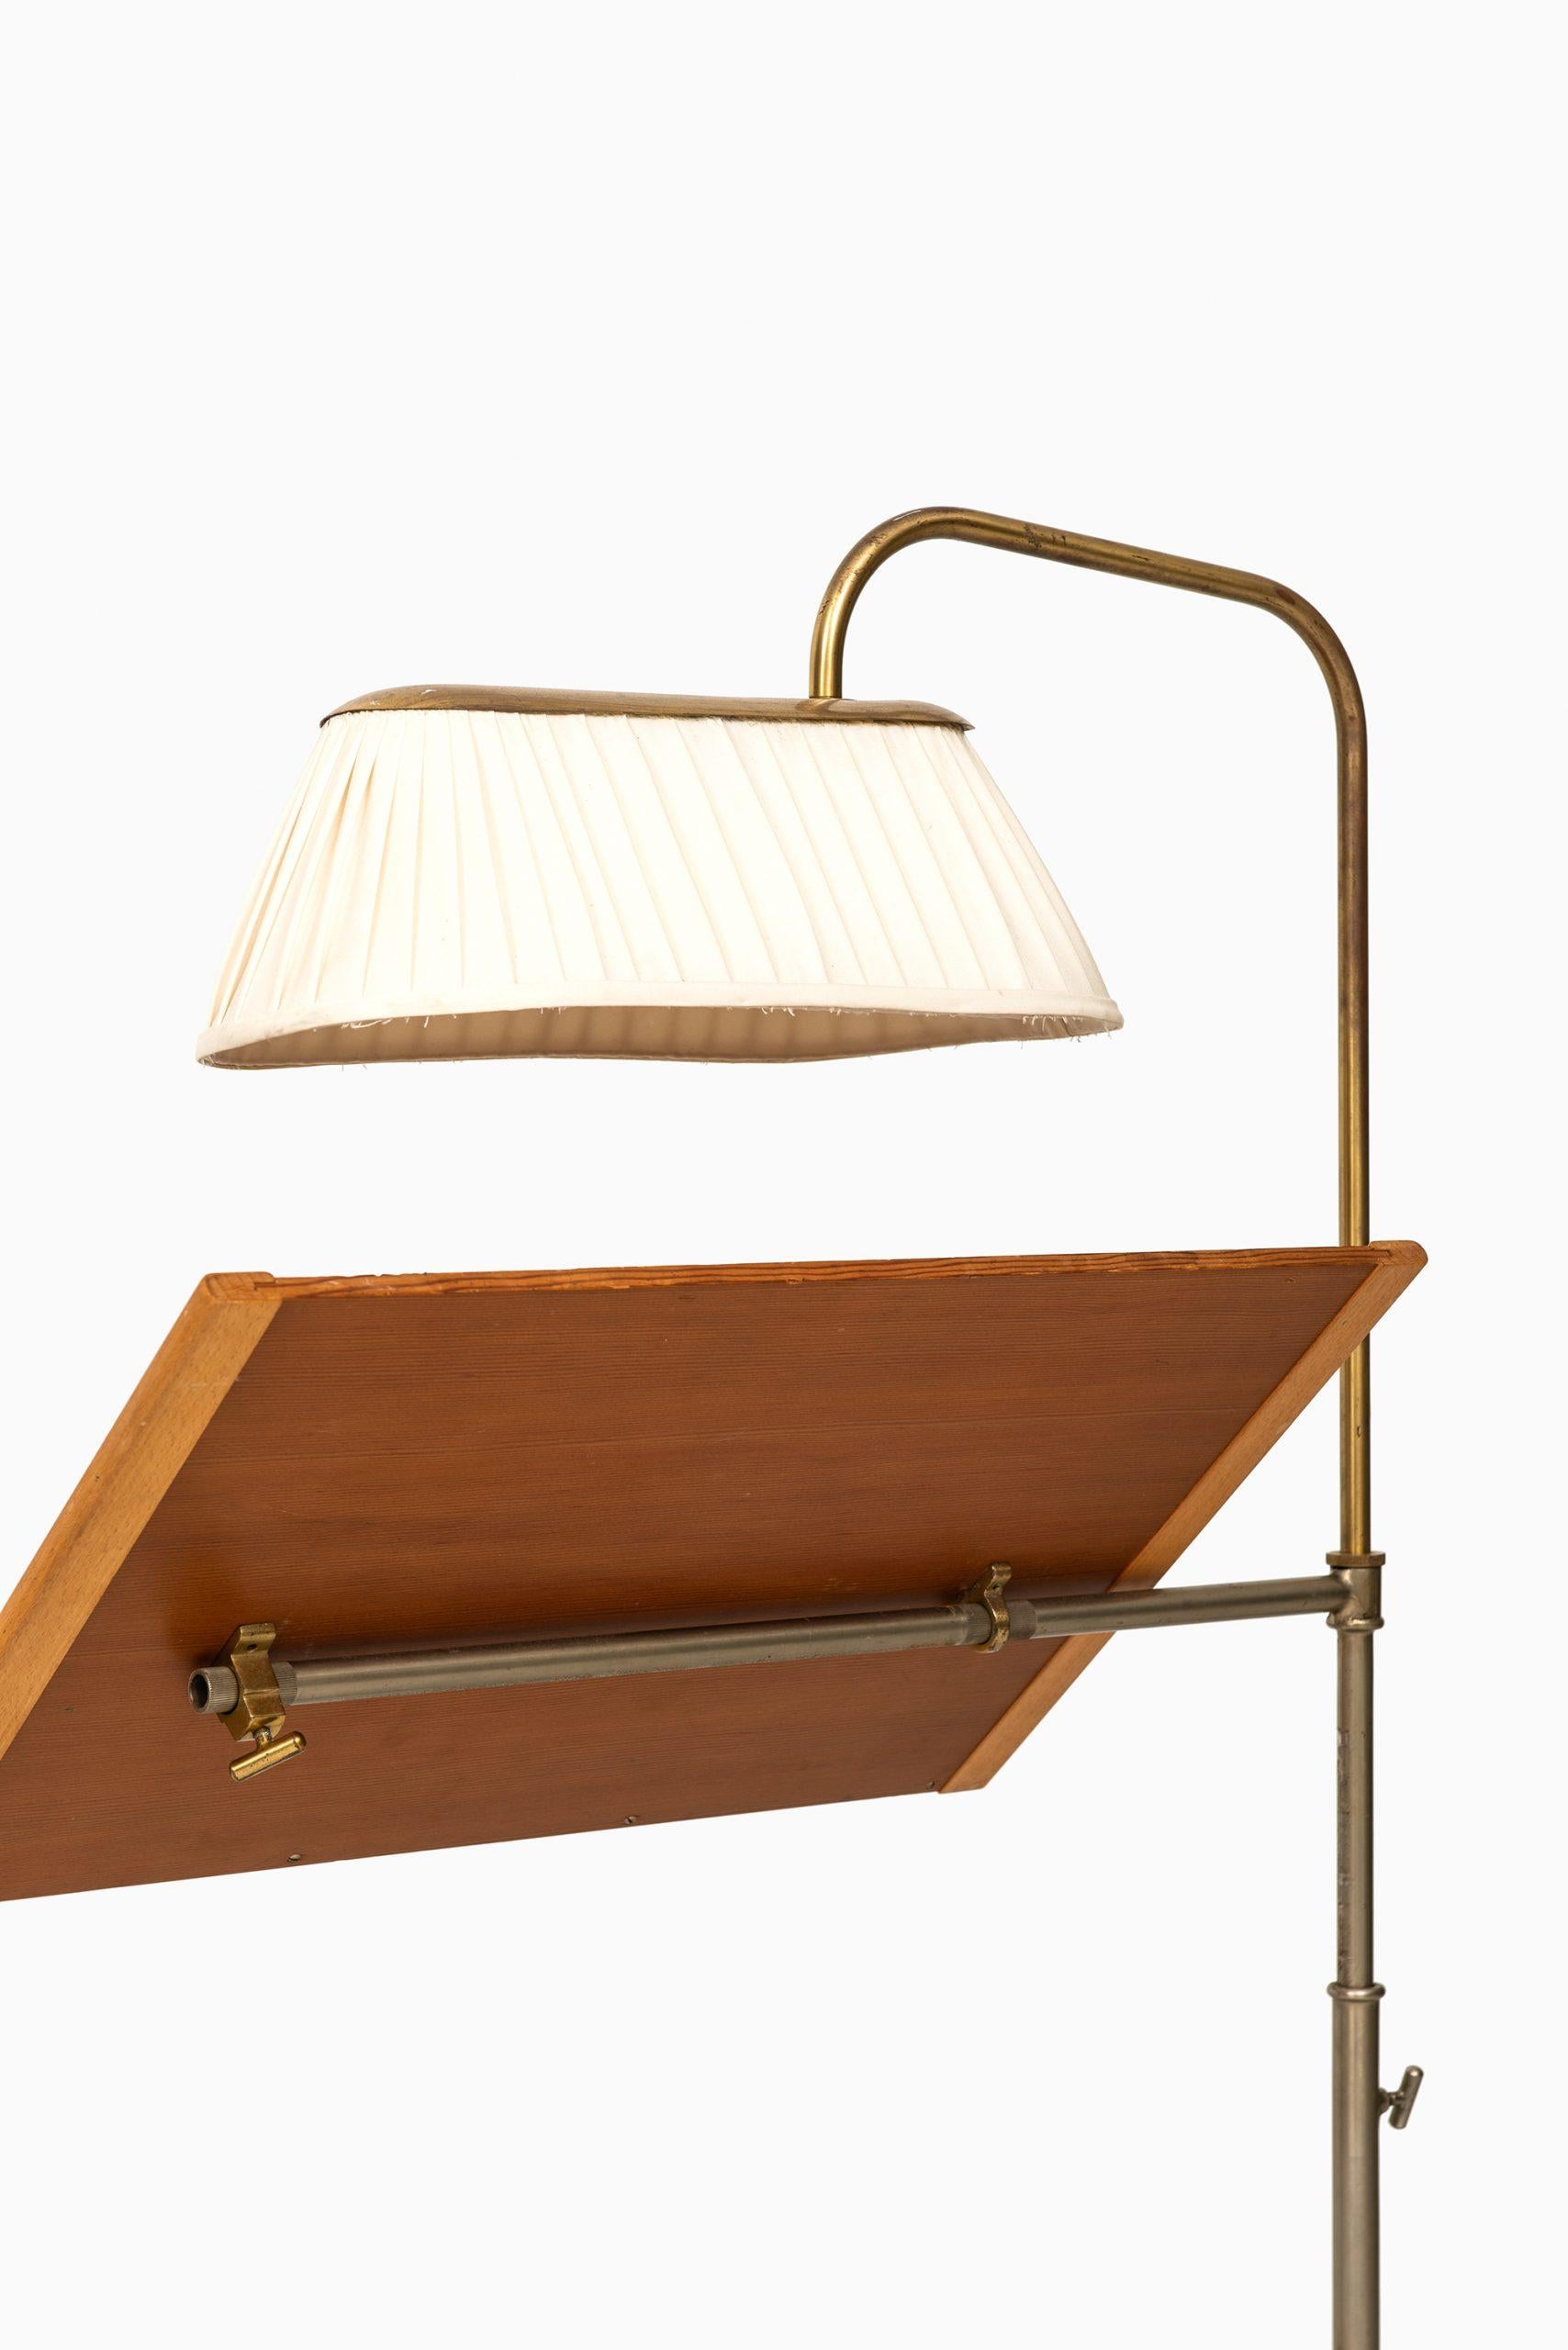 Brass Bruno Mathsson Reading Stand Produced by Karl Mathsson in Värnamo, Sweden For Sale